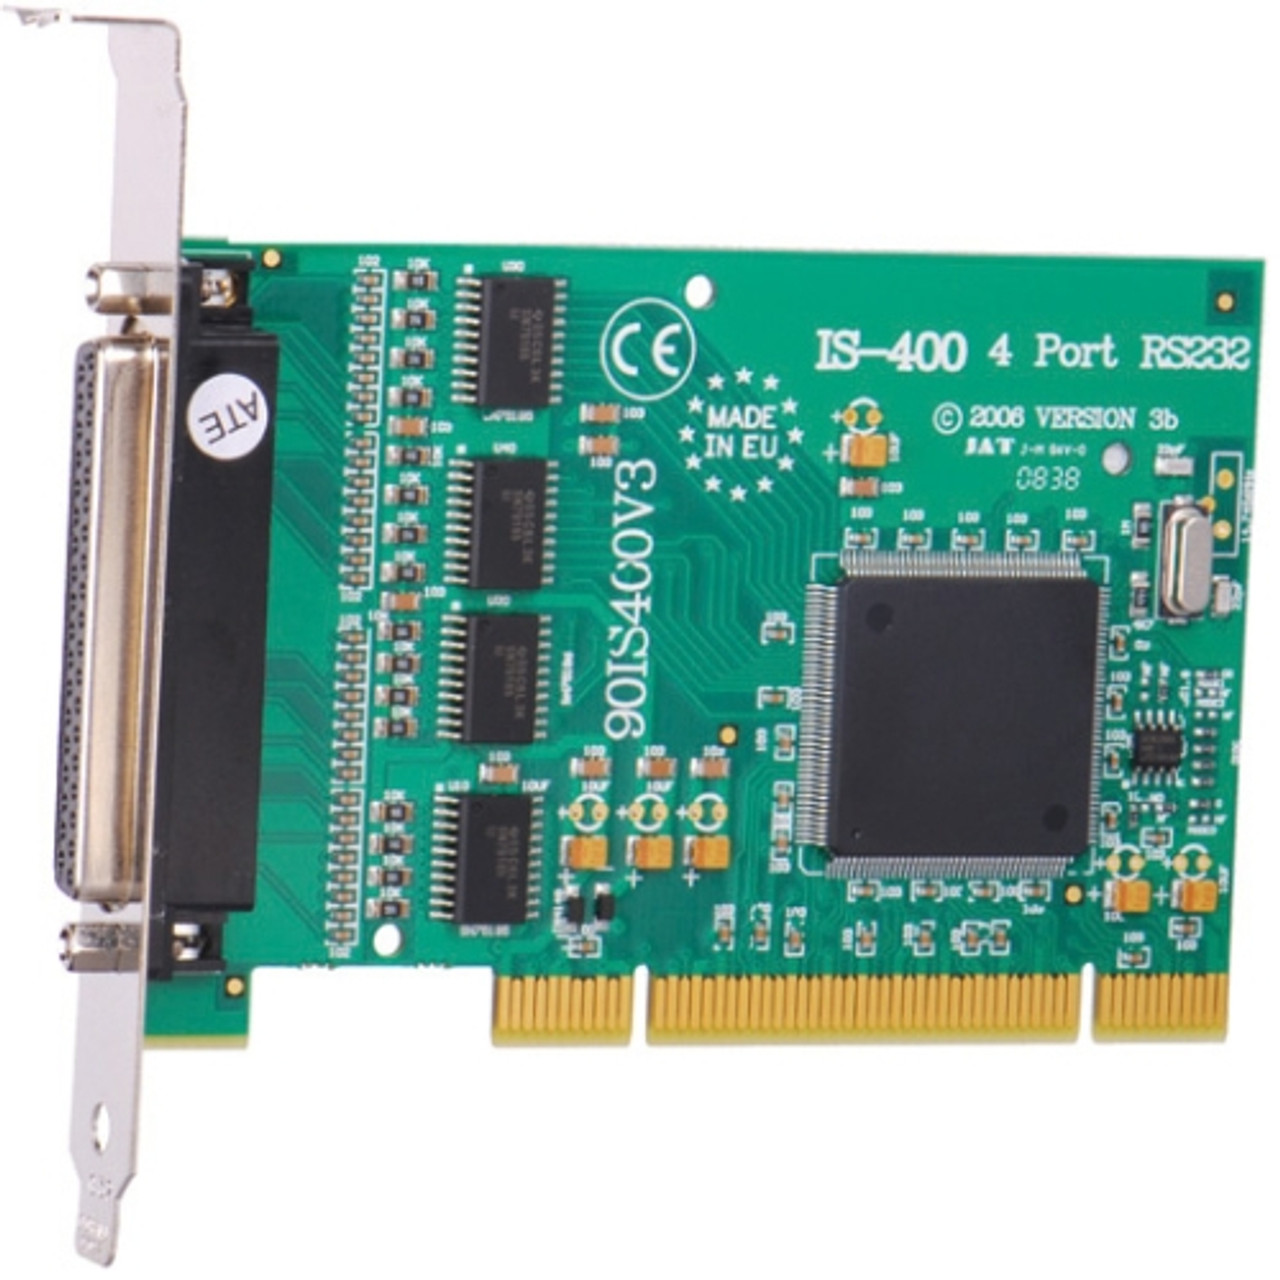 IS-400 Intashield IS-400 4-port Multiport Serial Adapter Universal PCI 4 x DB-9 RS-232 Serial Plug-in Card